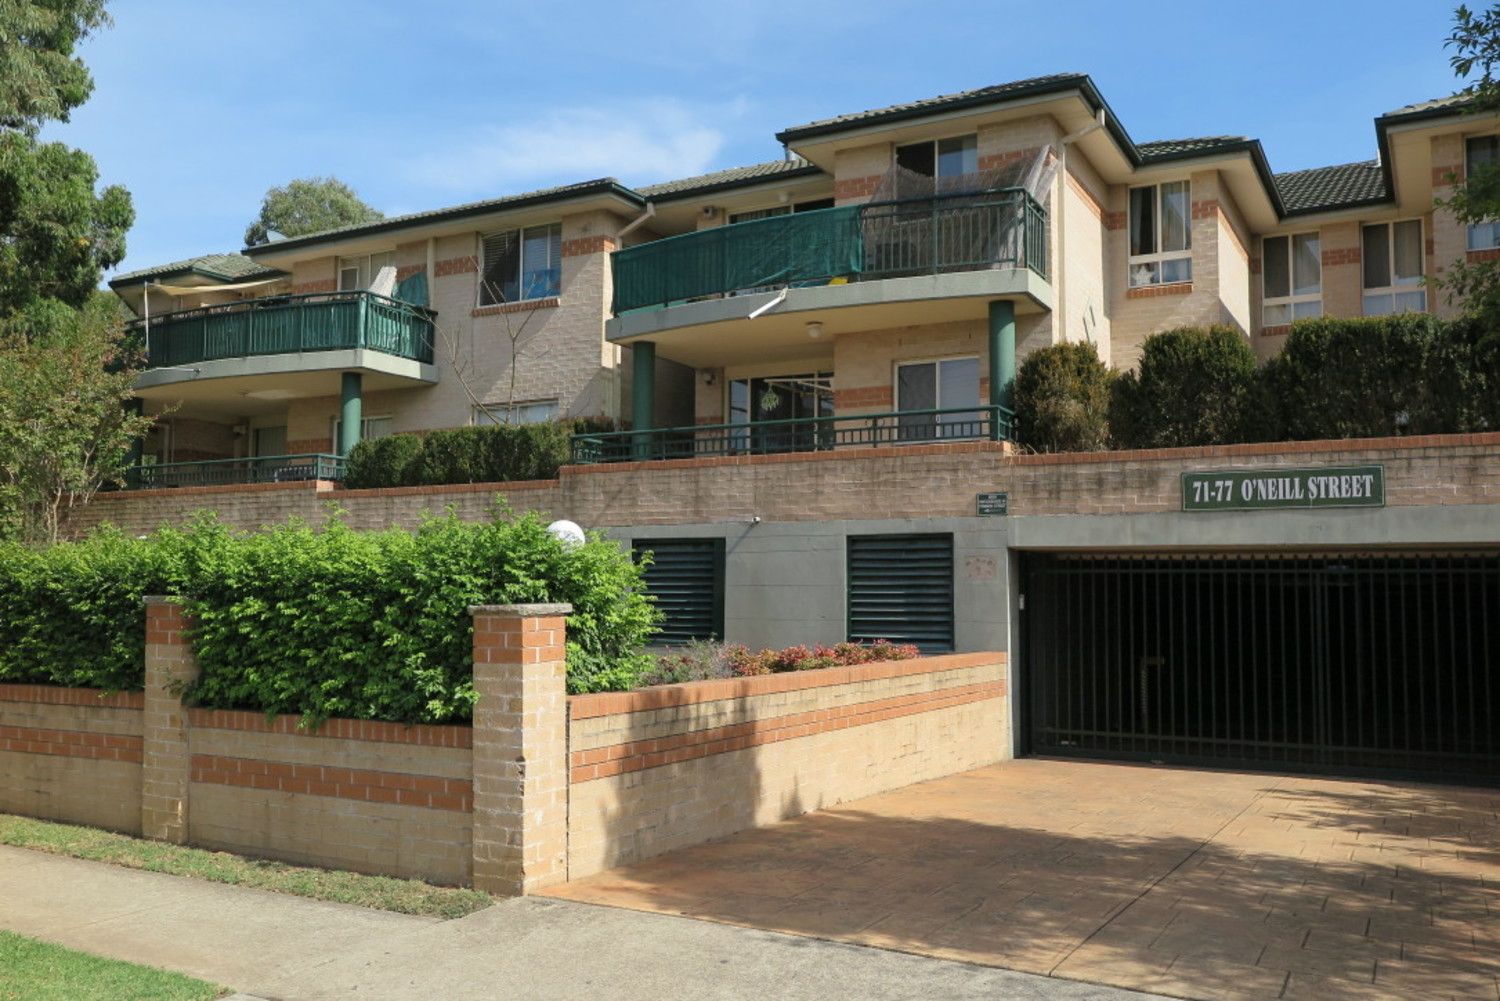 8/71-77 O'neill Street, Guildford NSW 2161